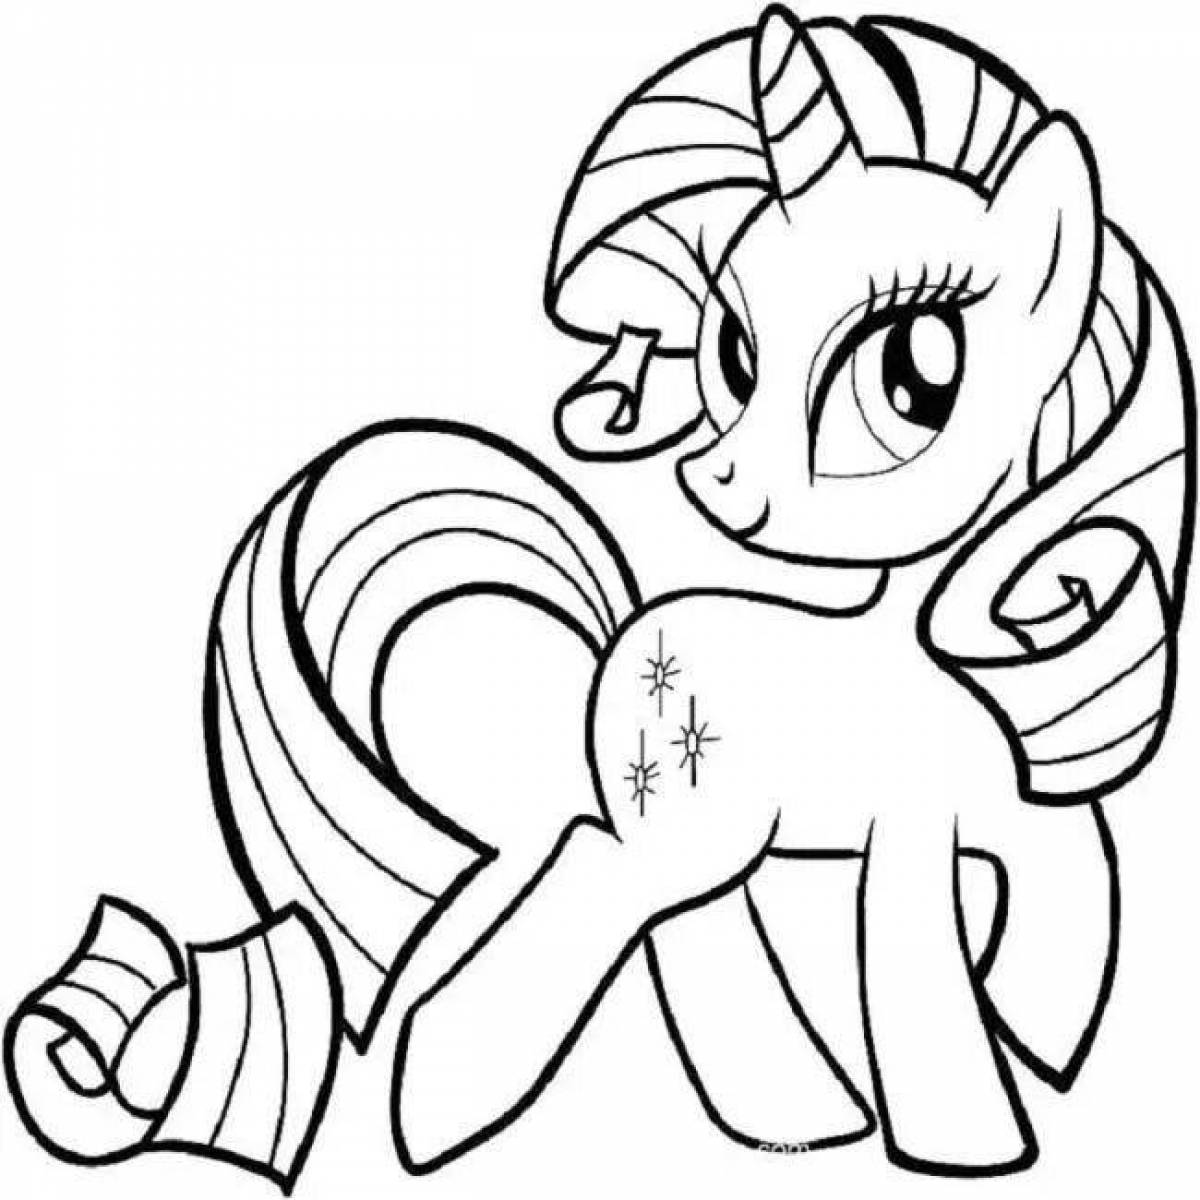 Radiant pony light coloring page